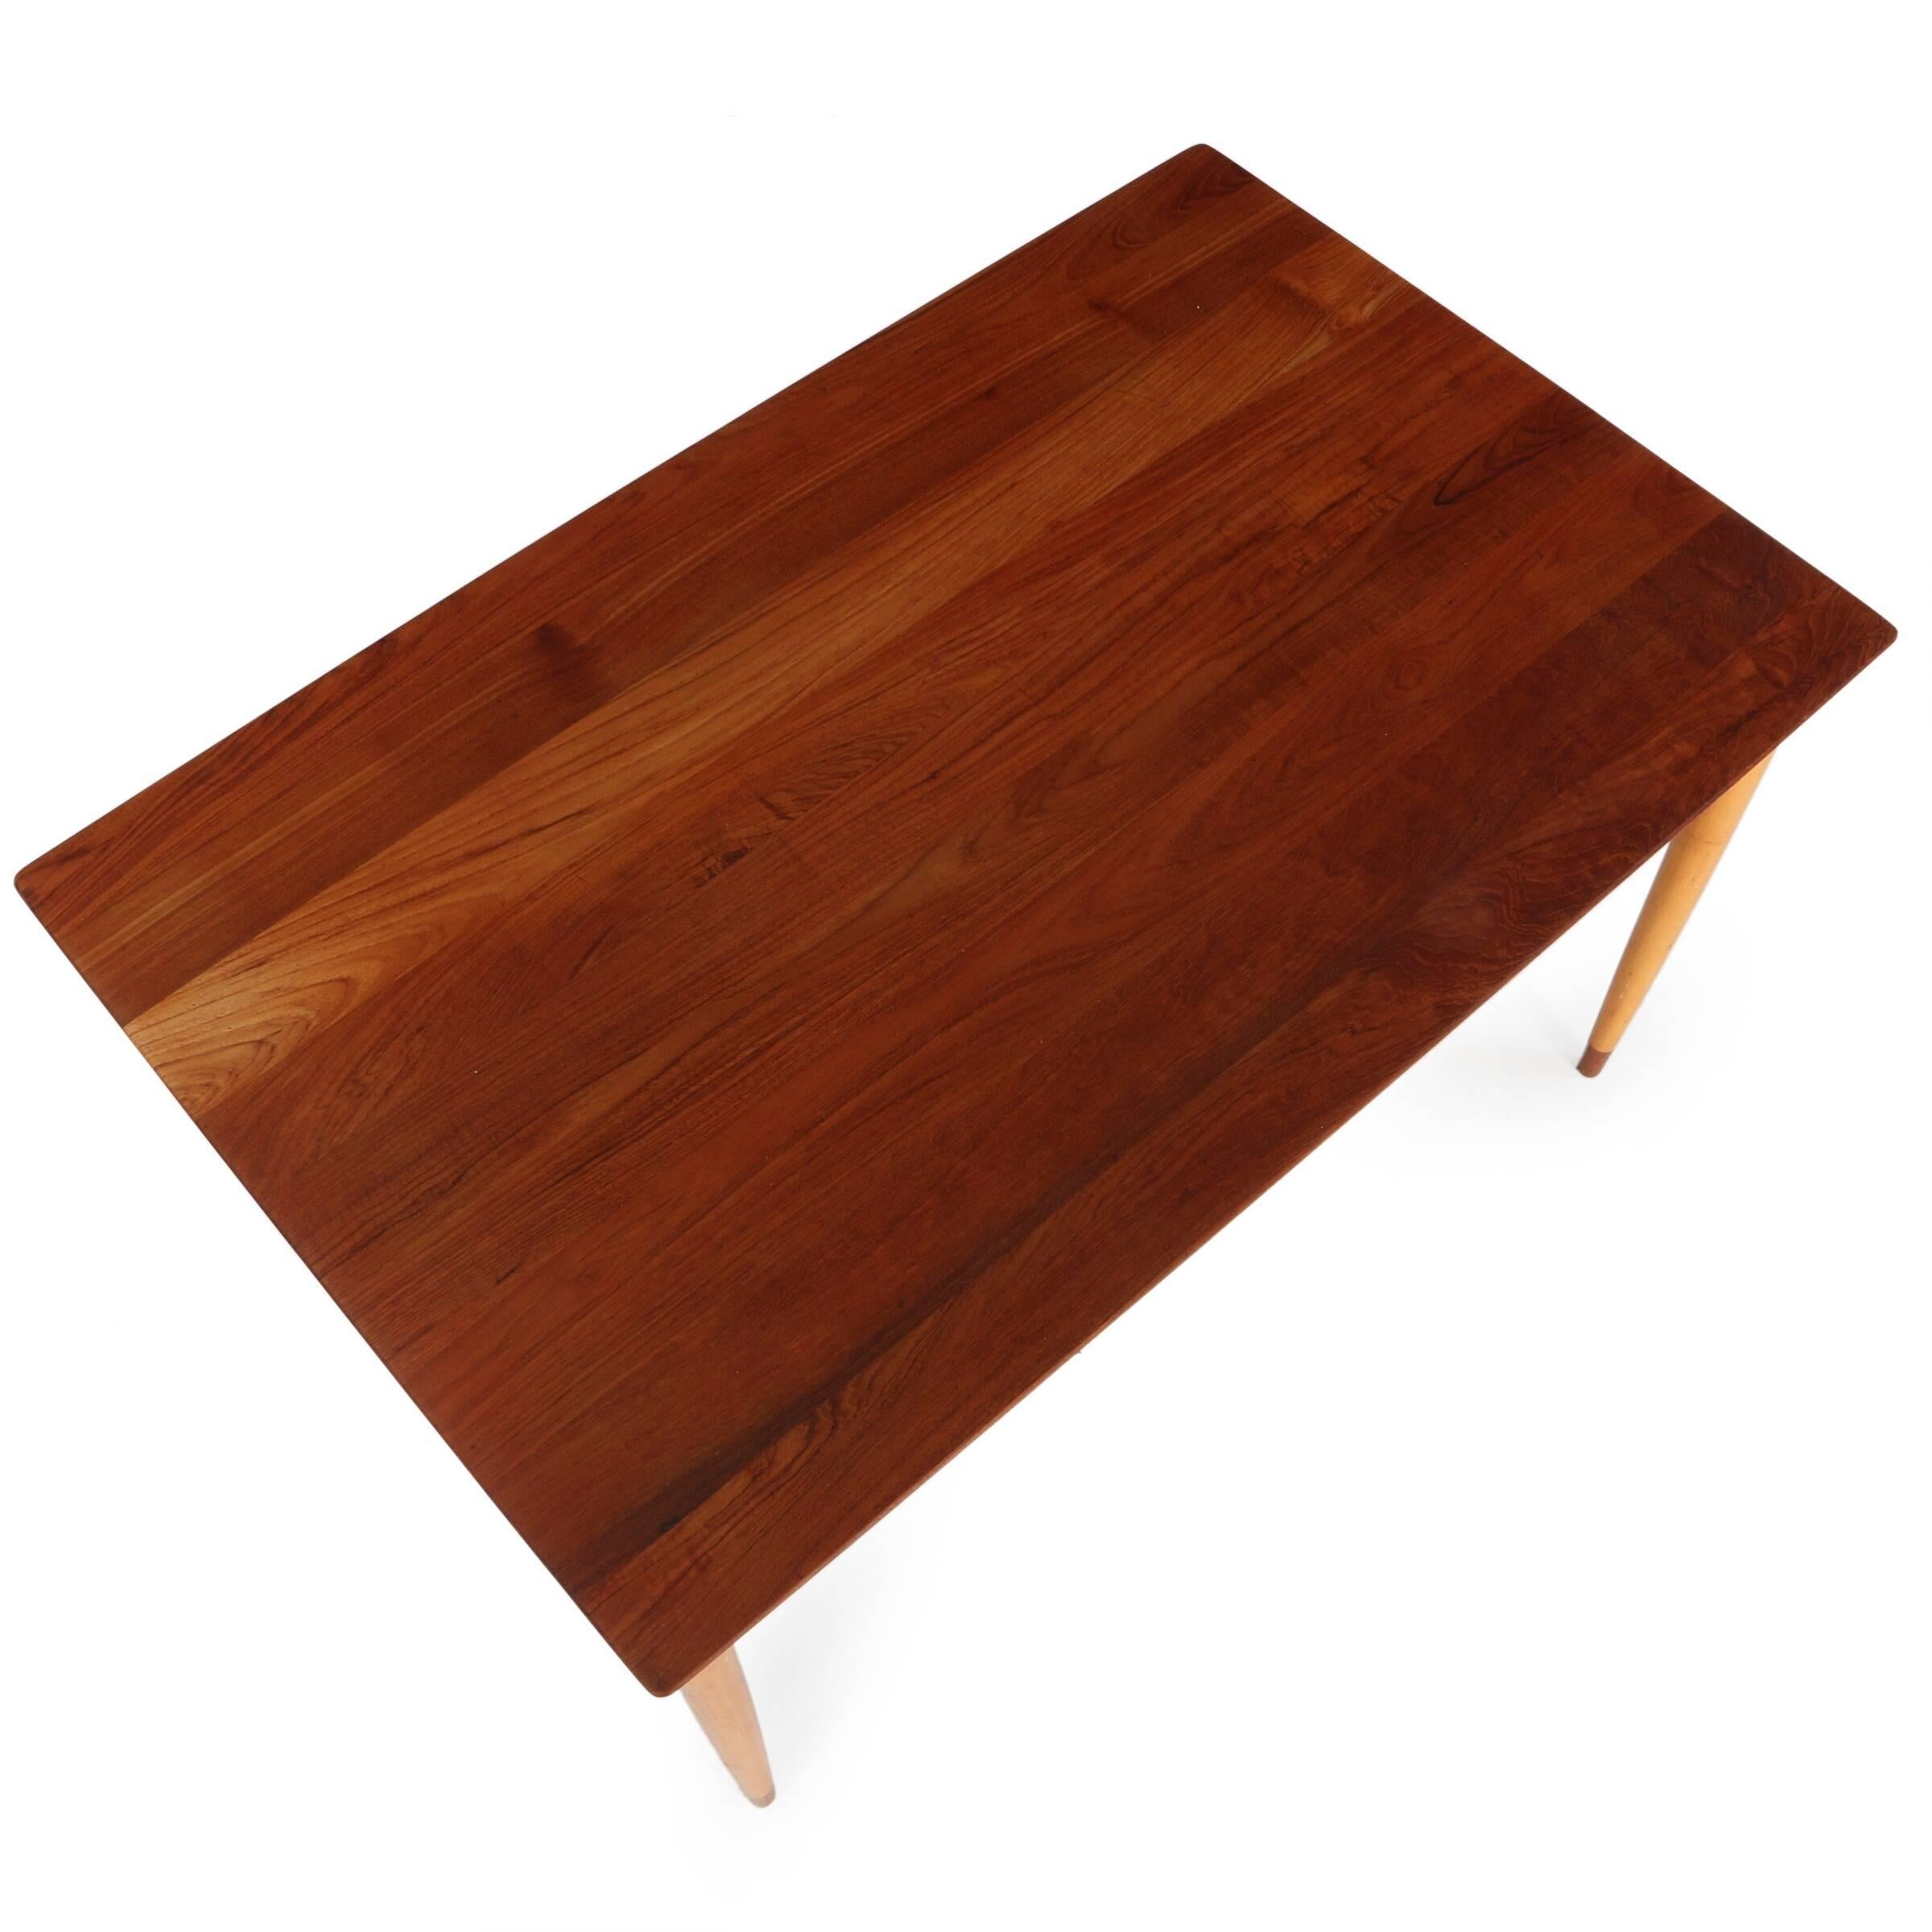 Mid-Century Modern Børge Mogensen Solid Teak and Beech Table Made by CM Madsen in May, 1957 For Sale